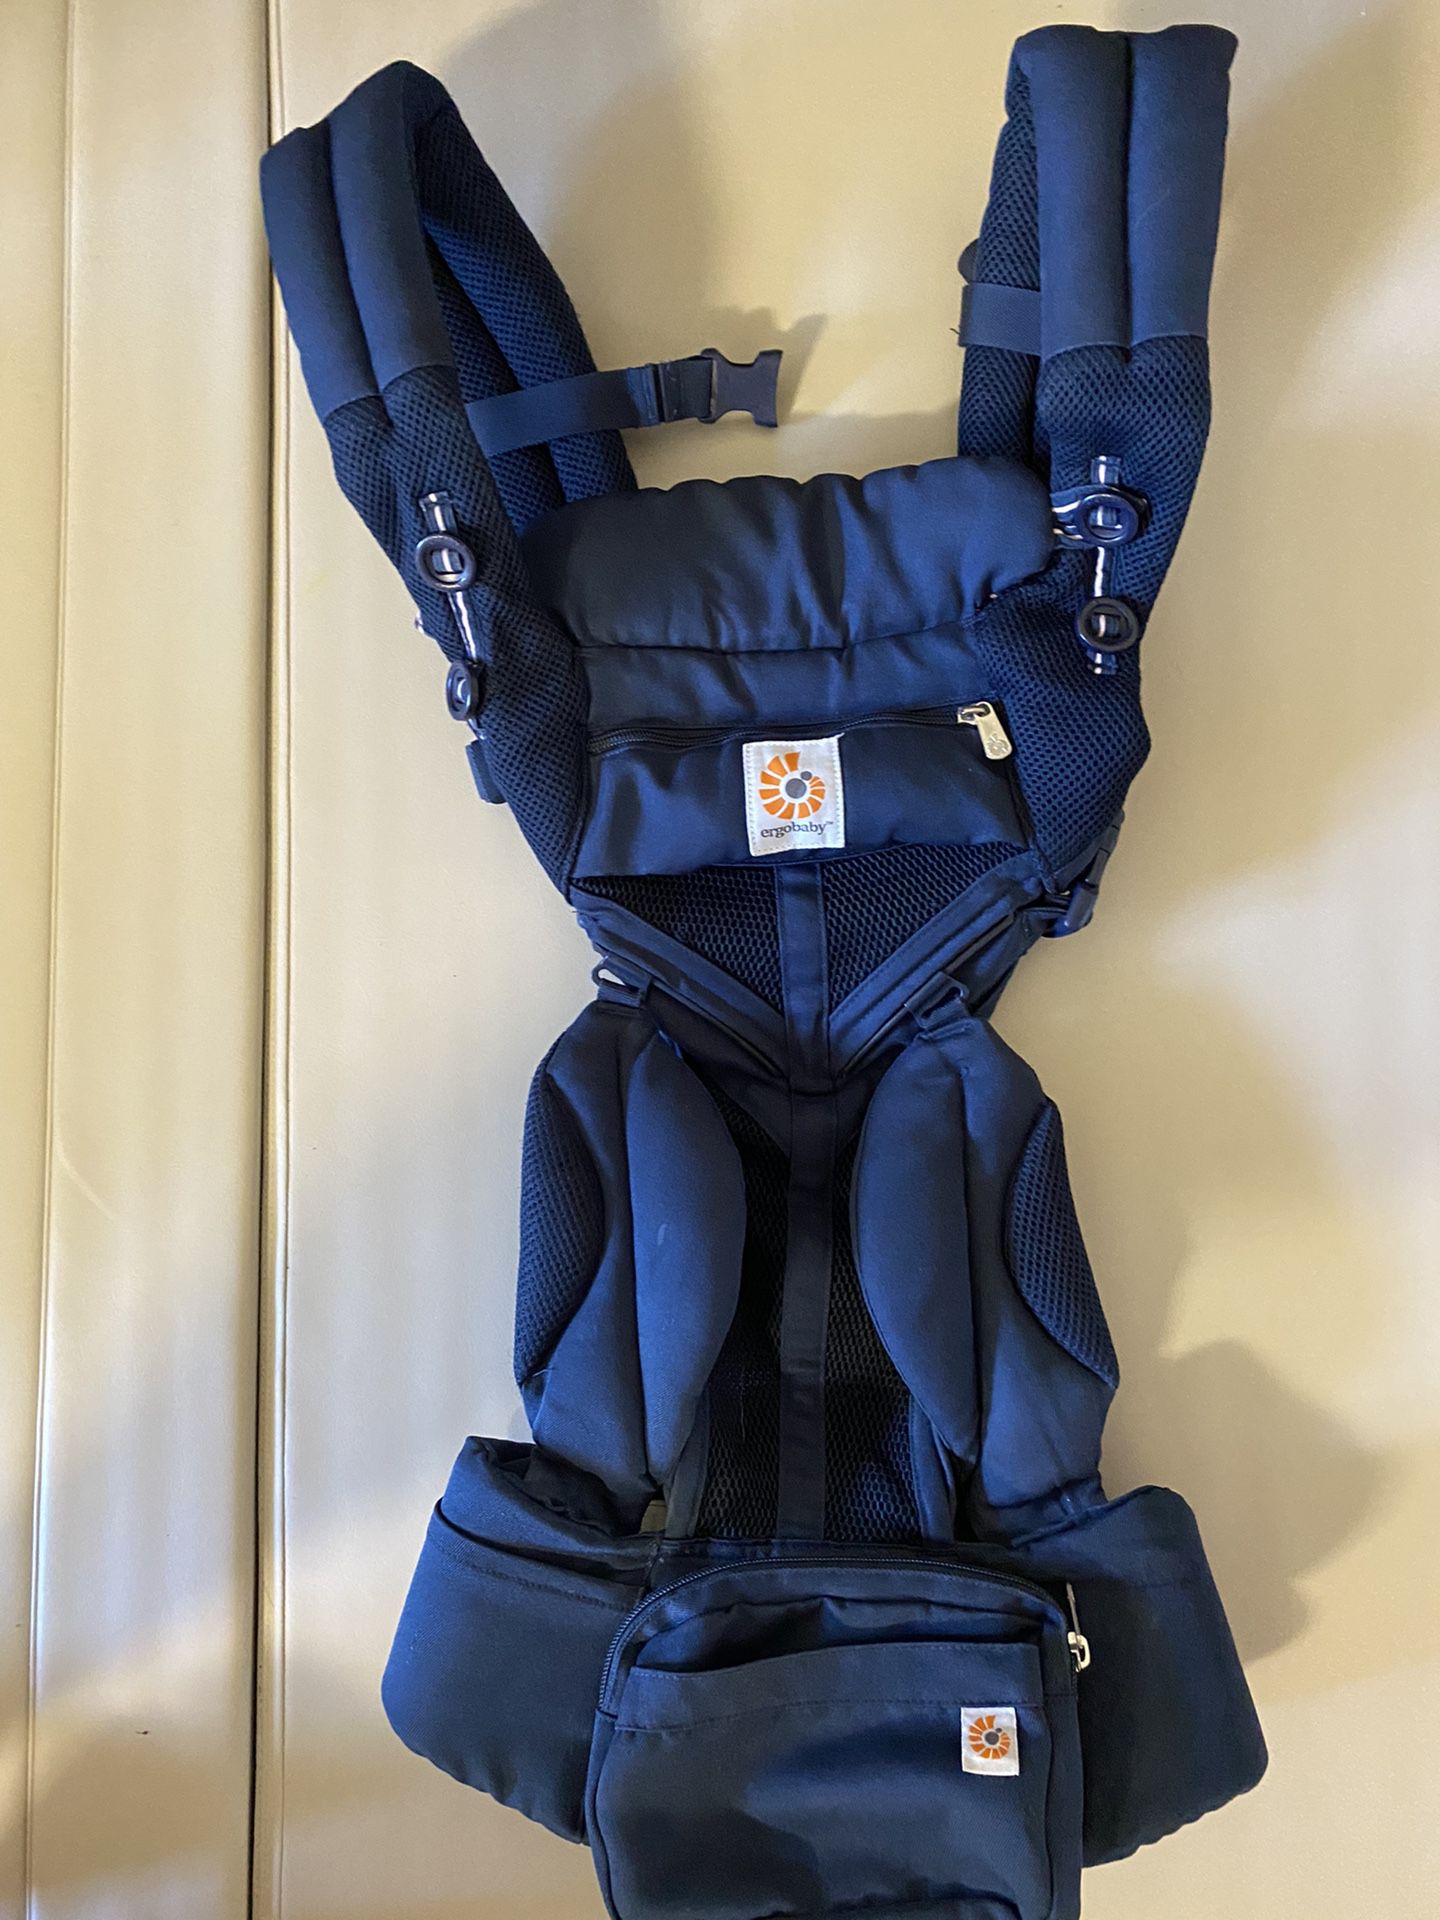 Ergobaby Omni 360 baby carrier for new born to toddler